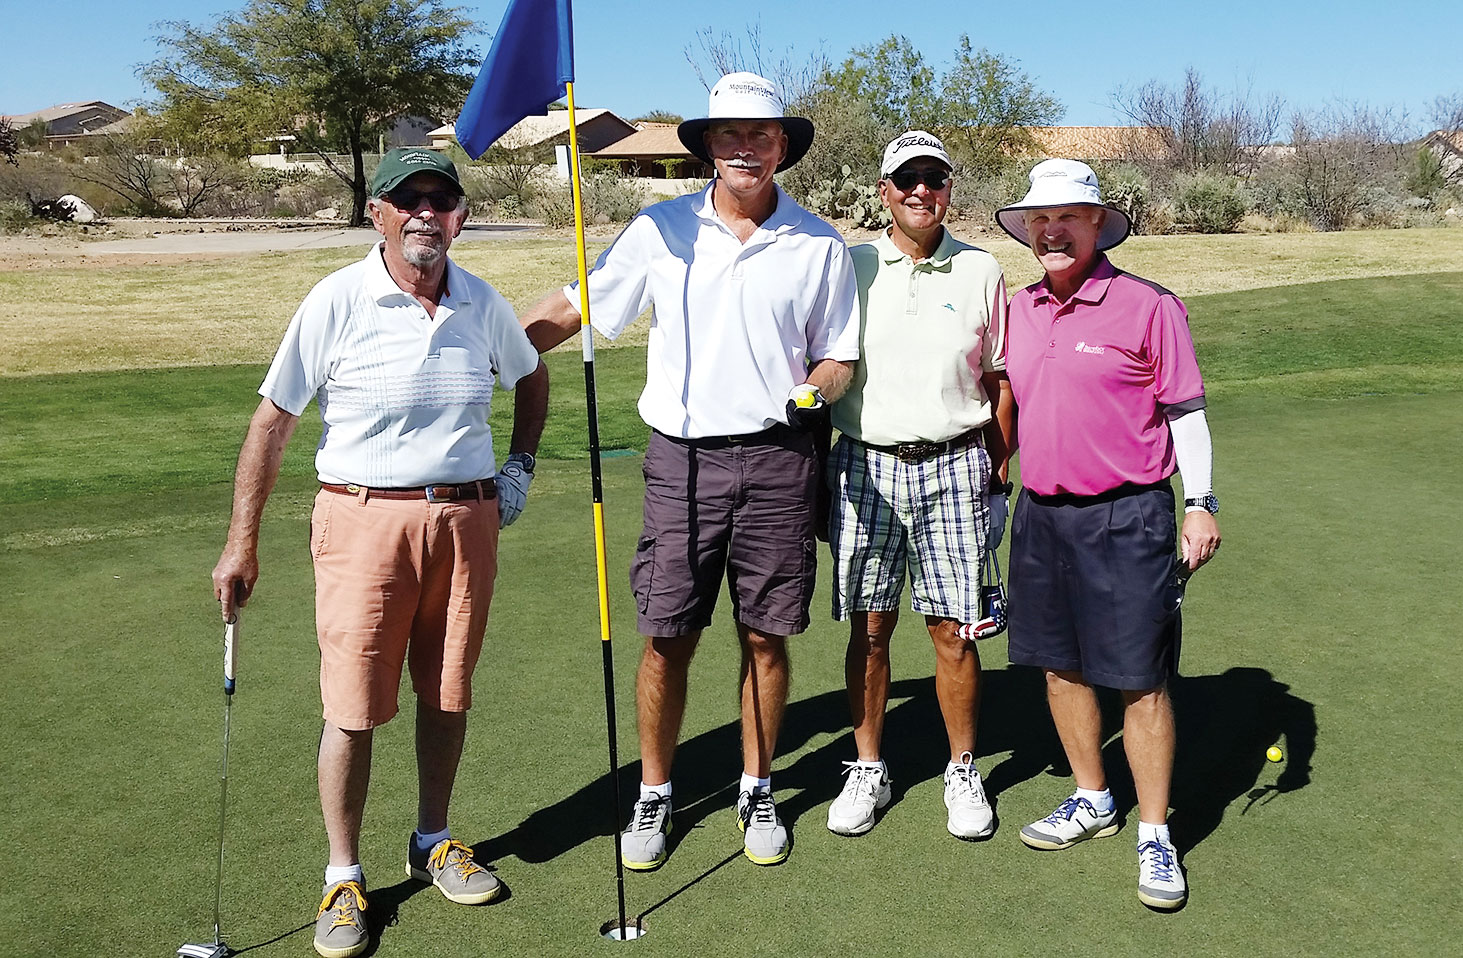 Left to right, the fearsome foursome: Ben Lichtman, Bon Maruniak, Peter Baragona and Dennis Marchand